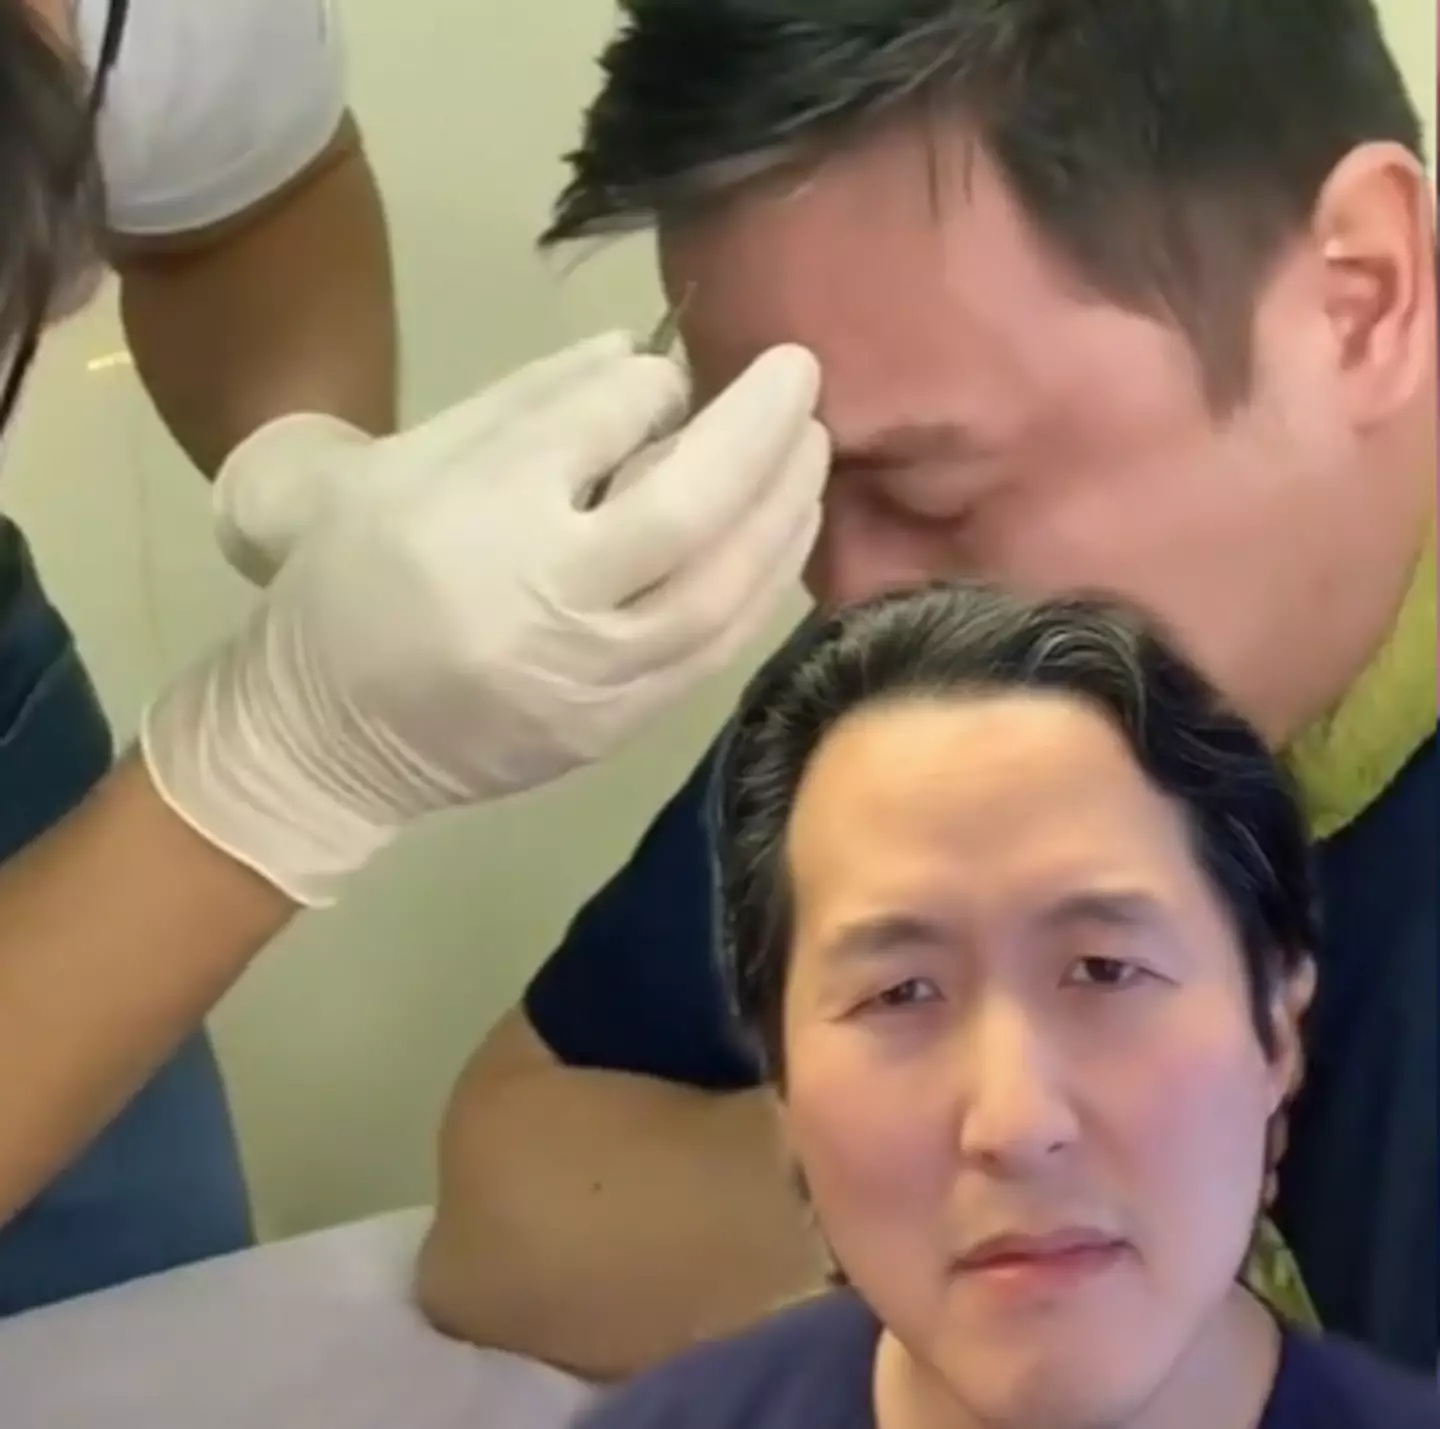 Doctor Reacts To Video of Bloodletting (@to0nyyounmd/TikTok)